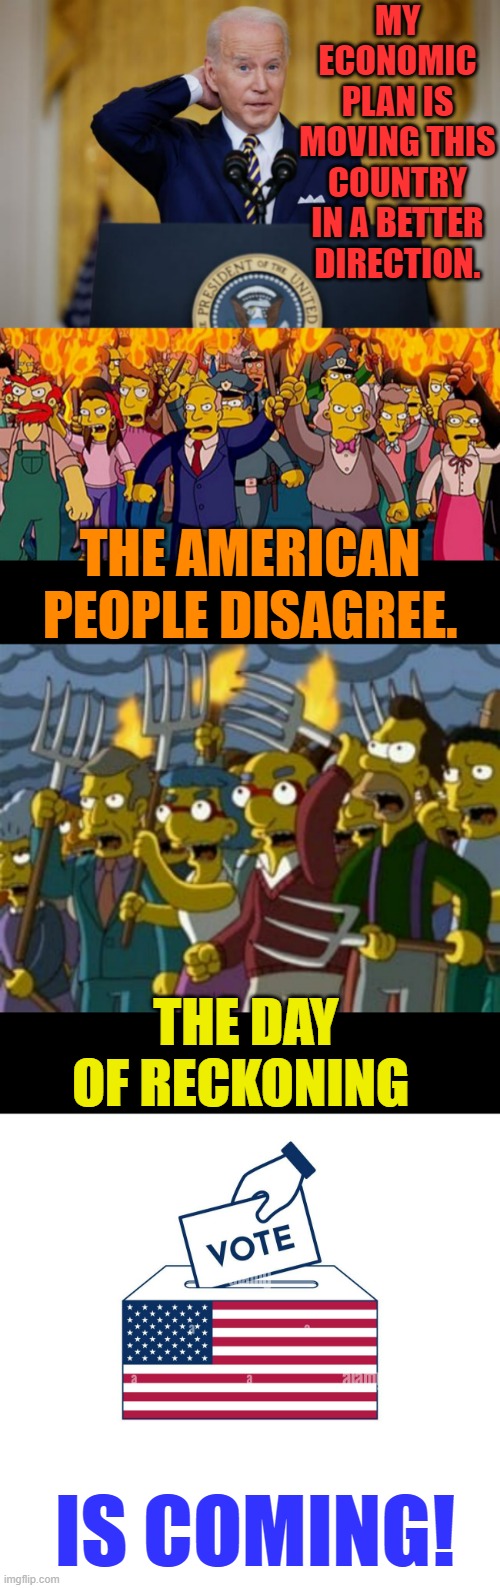 Sometimes The Truth Hurts | MY ECONOMIC PLAN IS MOVING THIS COUNTRY IN A BETTER DIRECTION. THE AMERICAN PEOPLE DISAGREE. THE DAY OF RECKONING; IS COMING! | image tagged in memes,politics,joe biden,economy,americans,disagree | made w/ Imgflip meme maker